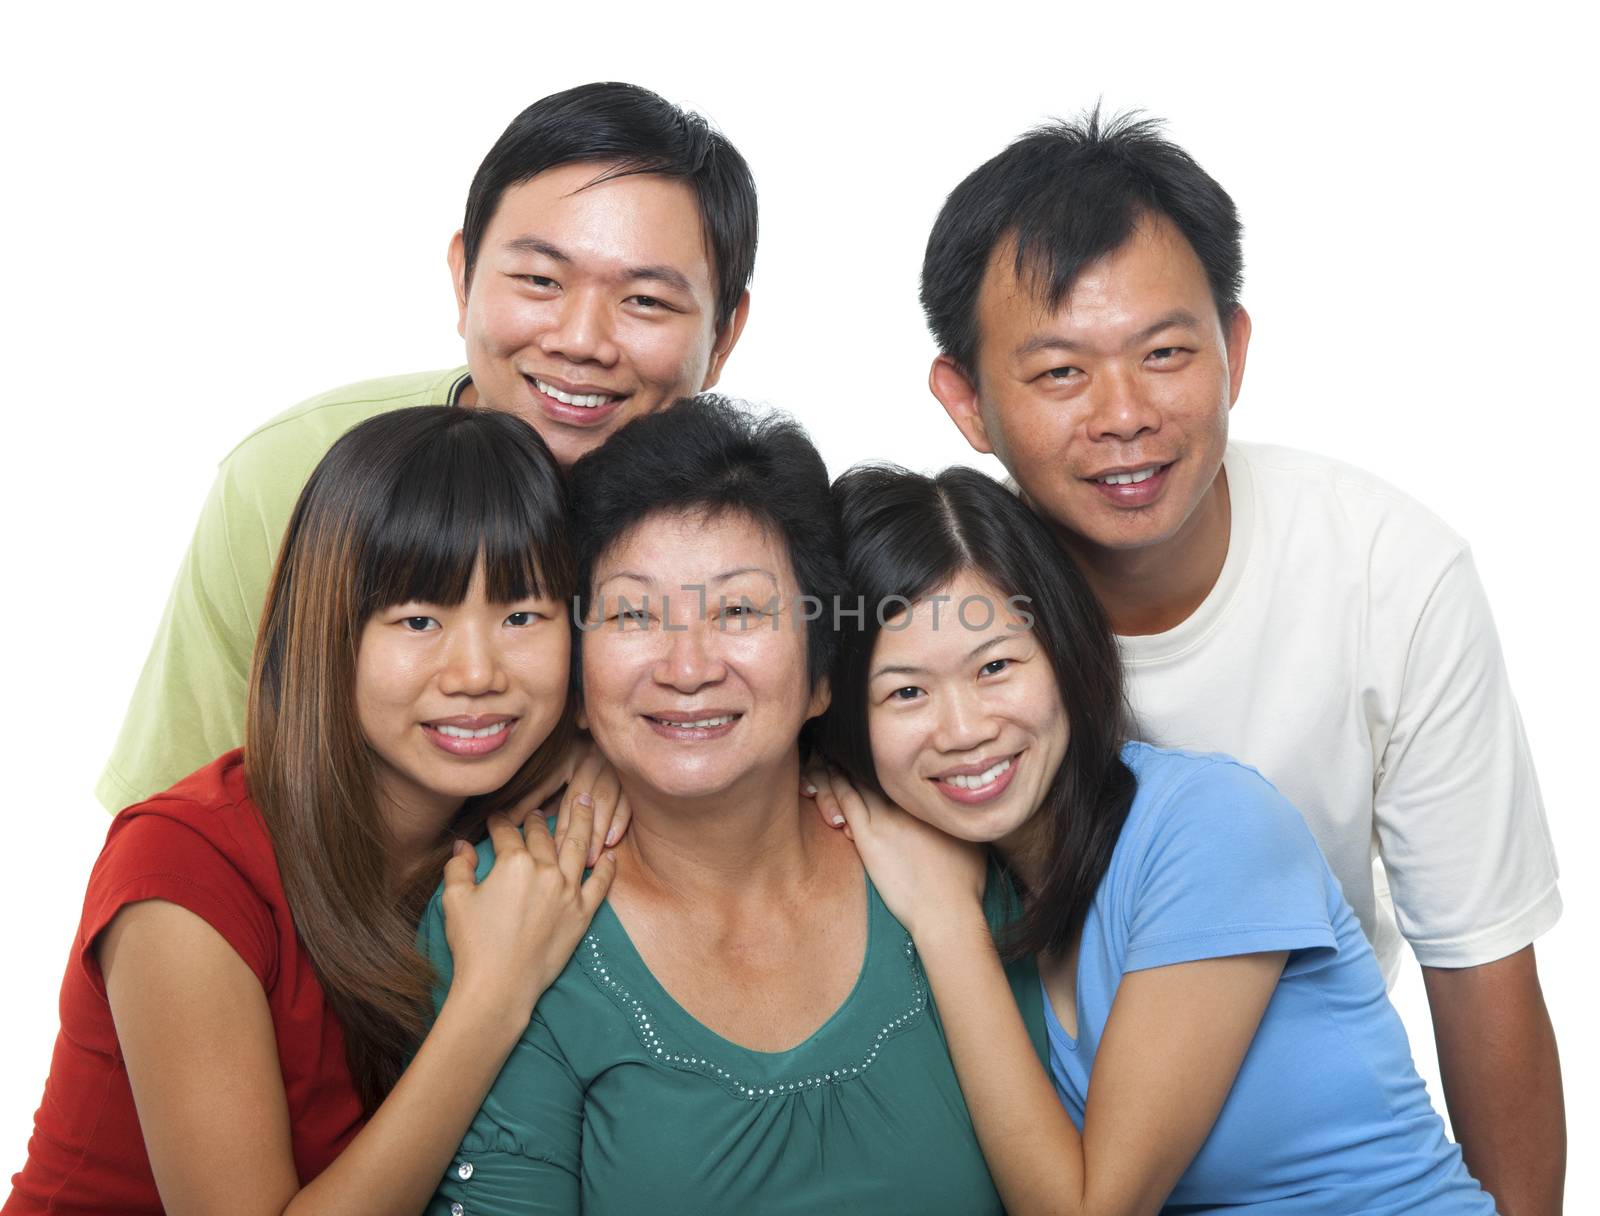 Asian family portrait. Happy senior mother and her adult offsprings, smiling isolated on white background.